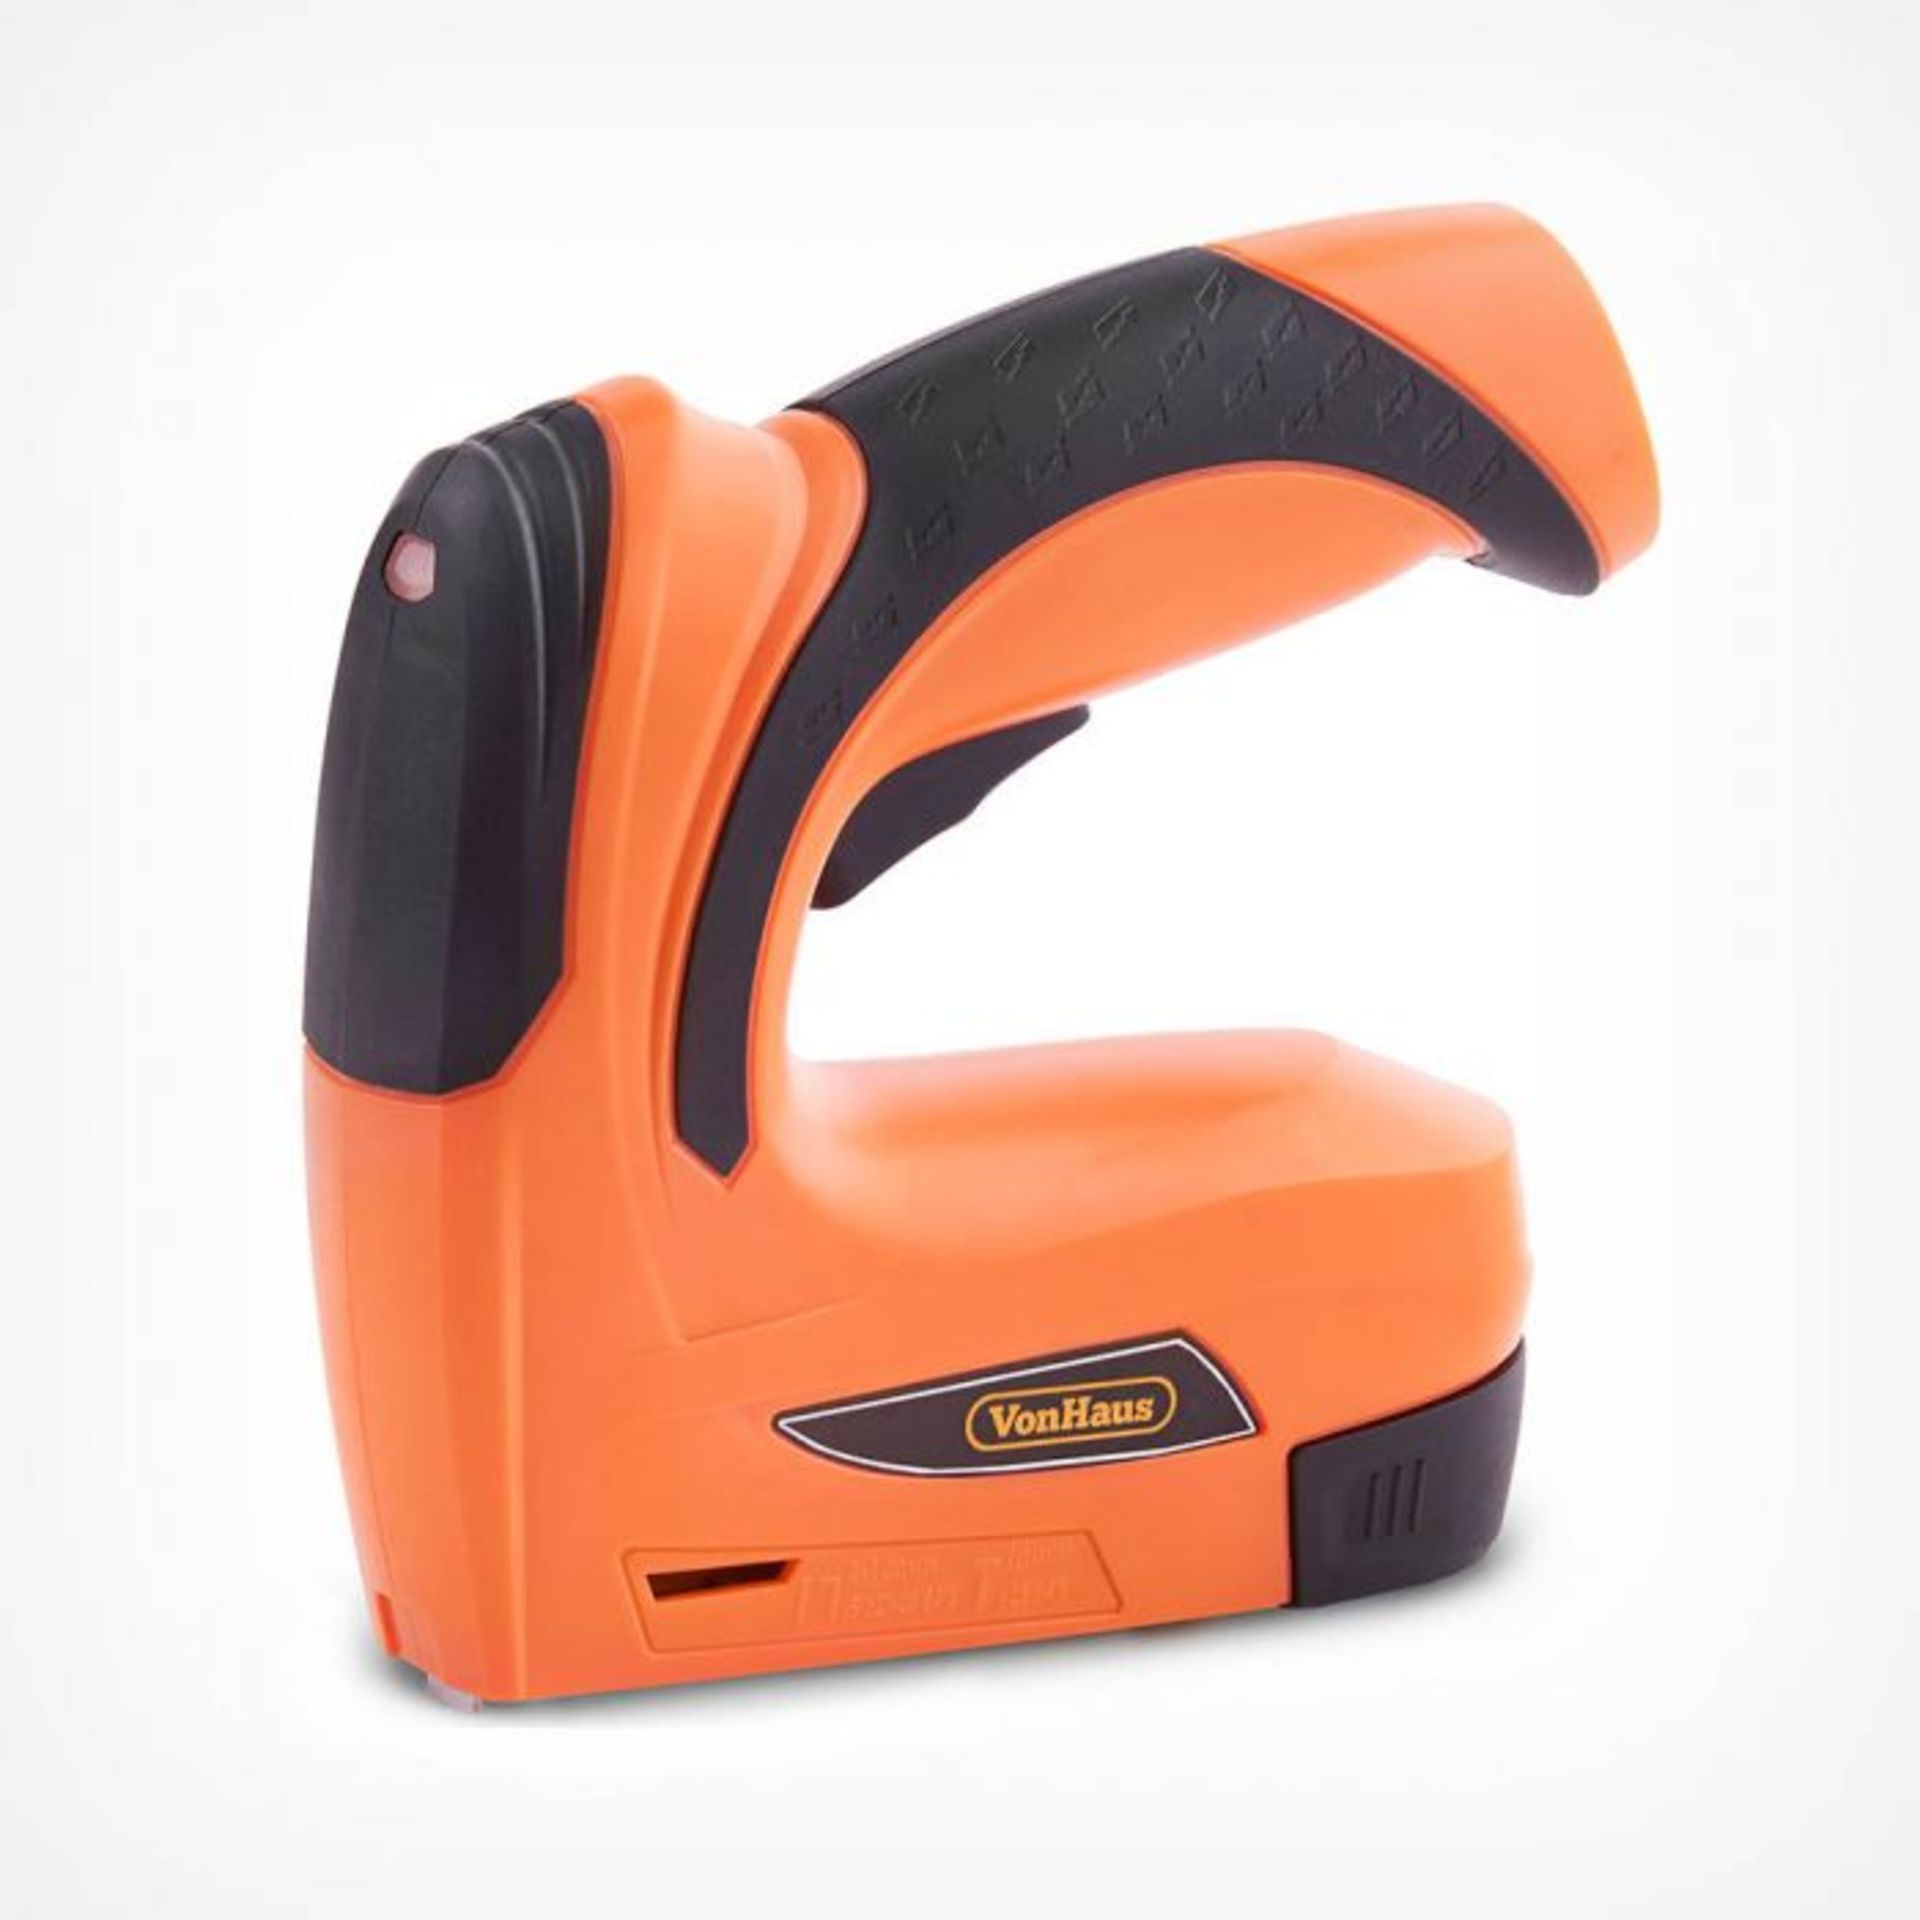 (V332) 3.6V Nailer & Stapler Ideal for crafting and decorating – quickly staple, nail or fas... - Image 2 of 4